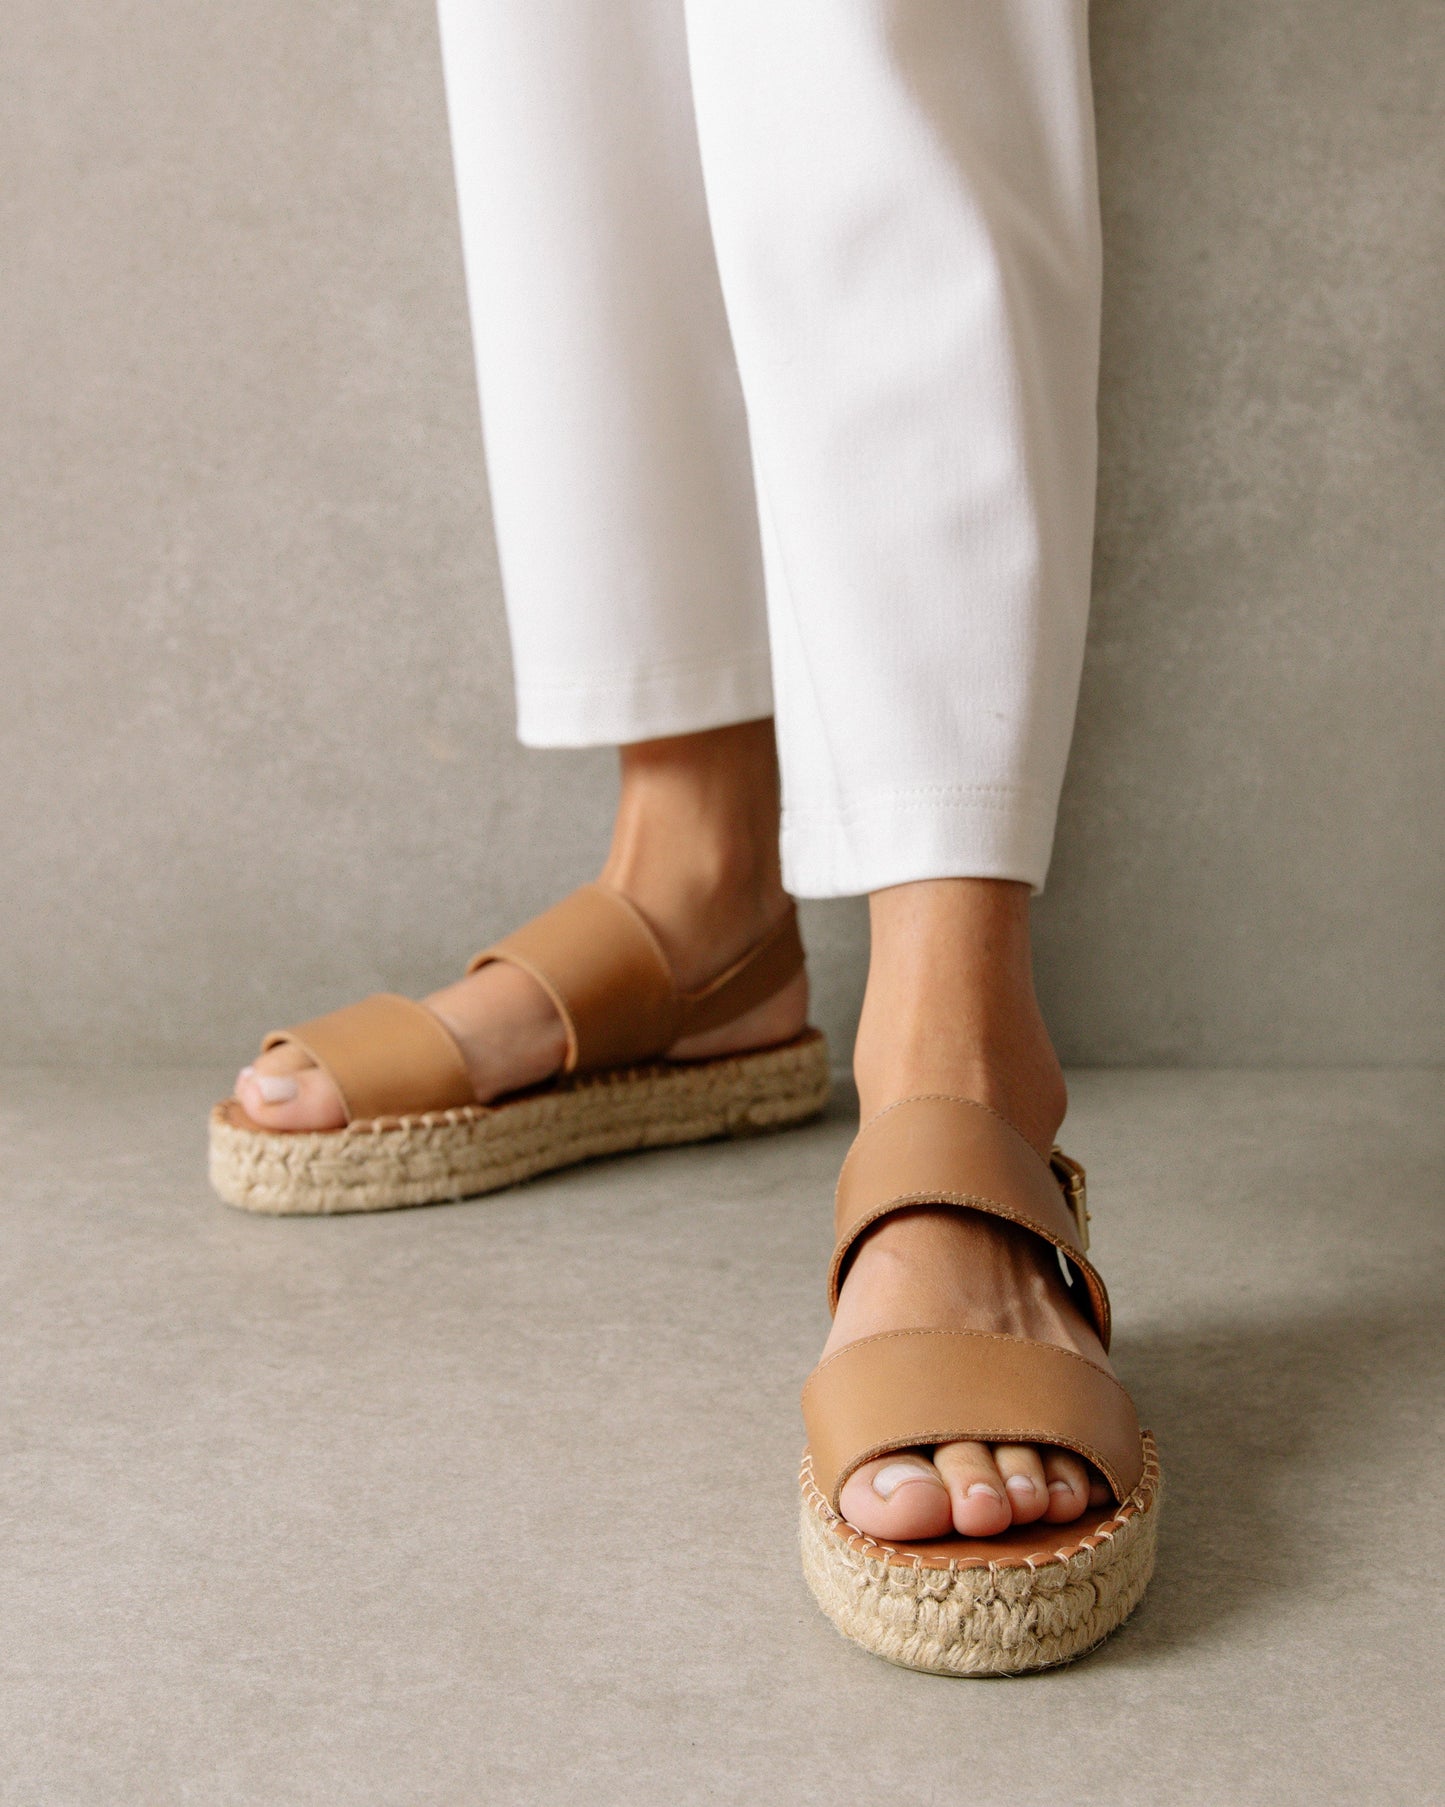 These double strap platform sandals boast two straight, wide straps with an ankle strap with buckle to adjust your desired fit. They also have an open toe so you can let your feet breathe in the summer heat. Sustainably made in Spain.